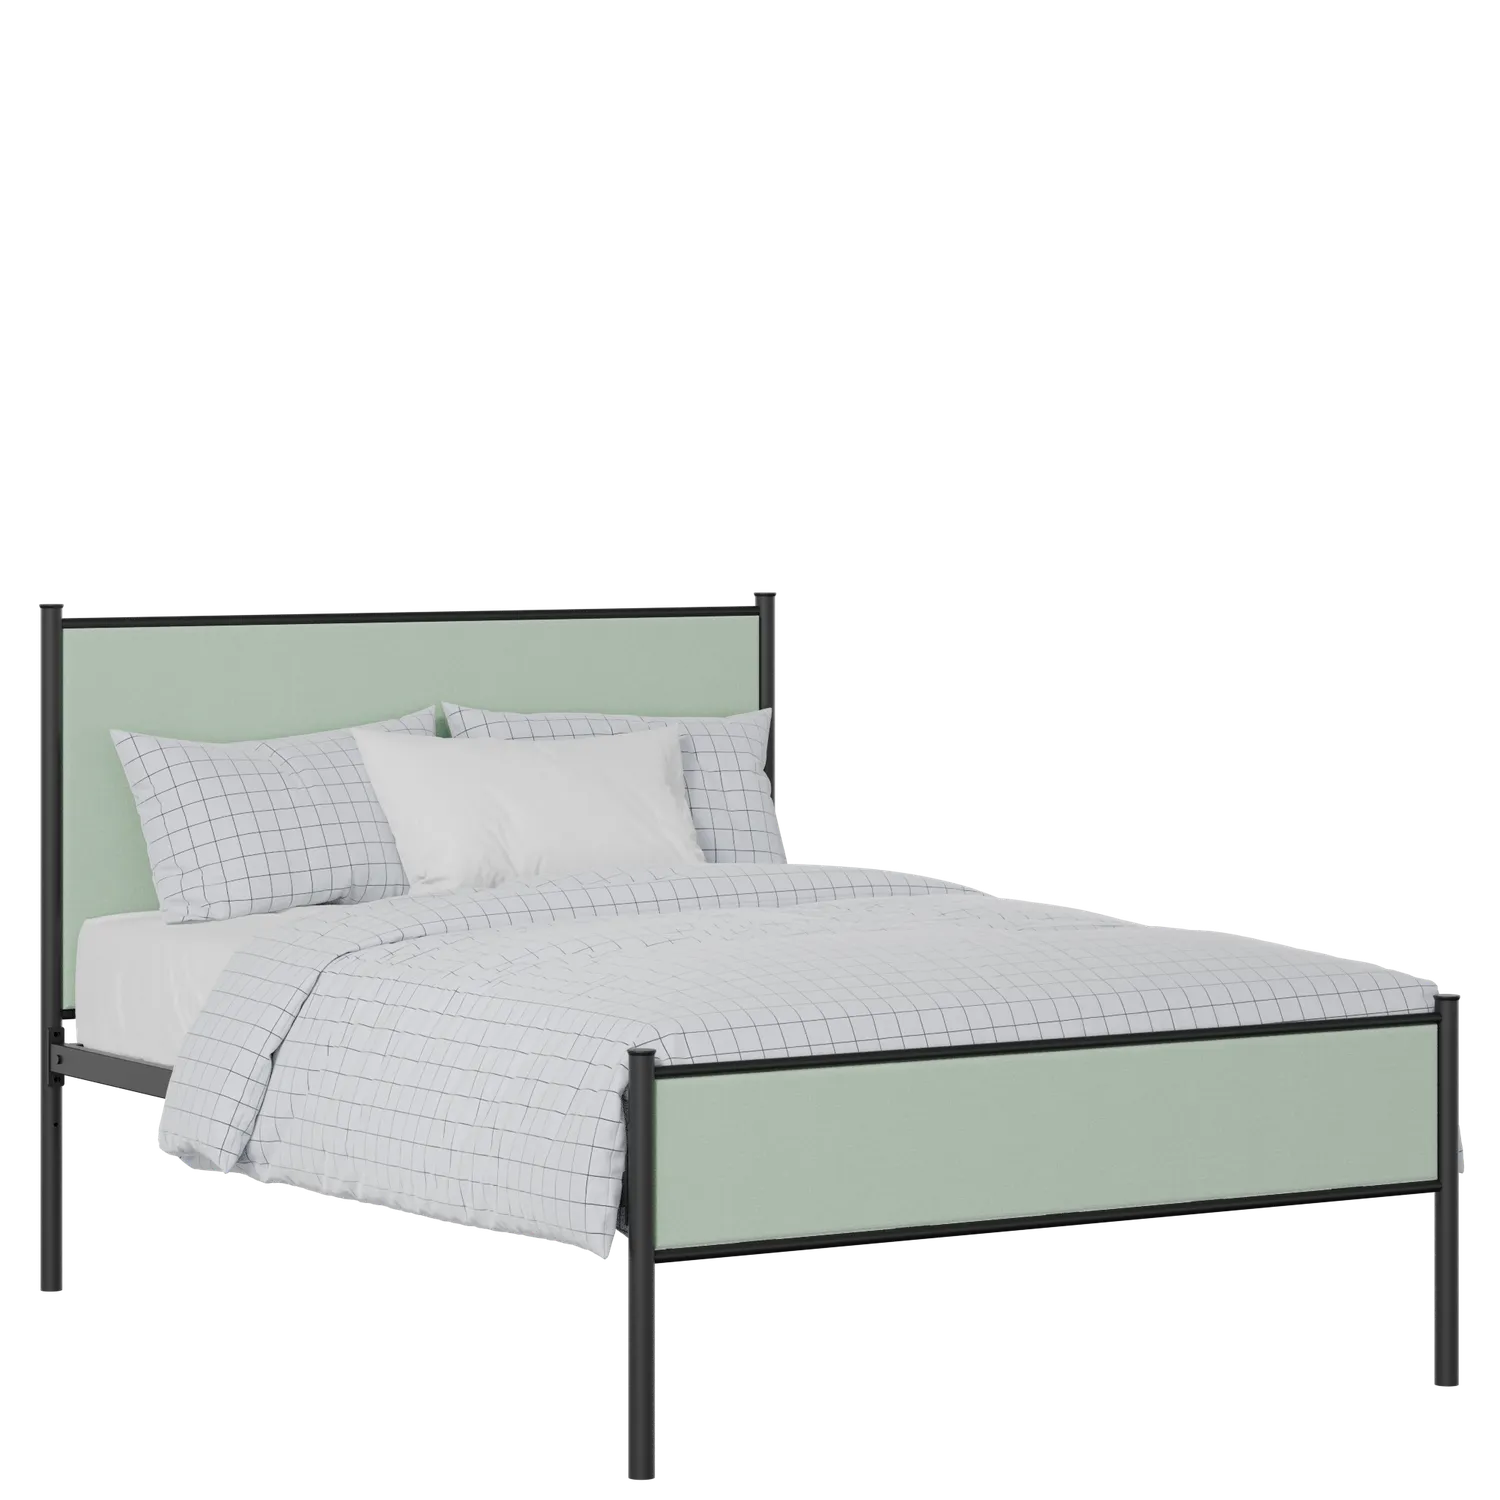 Brest Slim iron/metal upholstered bed in black with mineral fabric